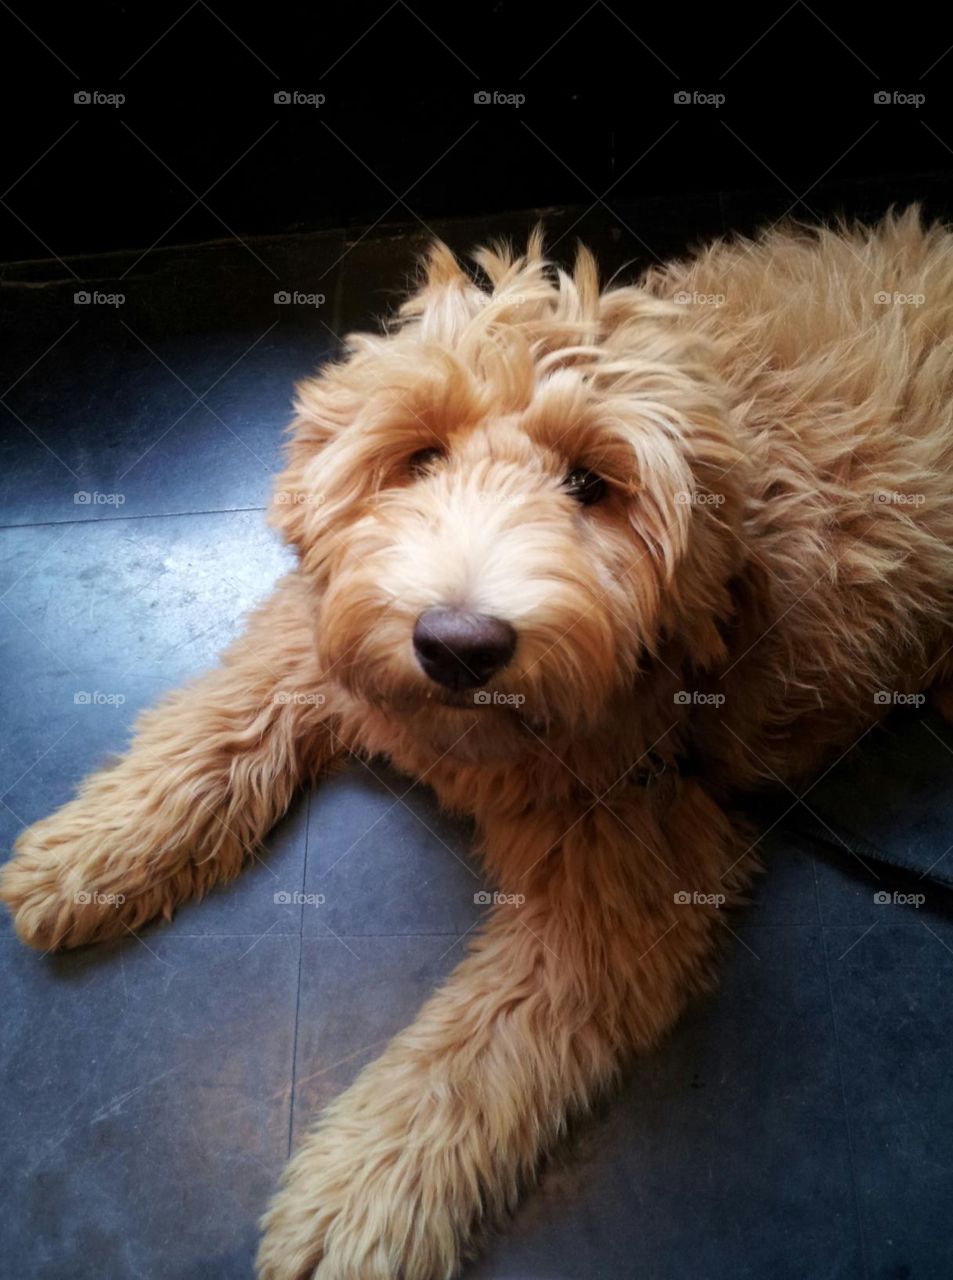 “I’m listening, I’m watching, I’m focusing on you!” Australian labradoodle puppy behaving really well.